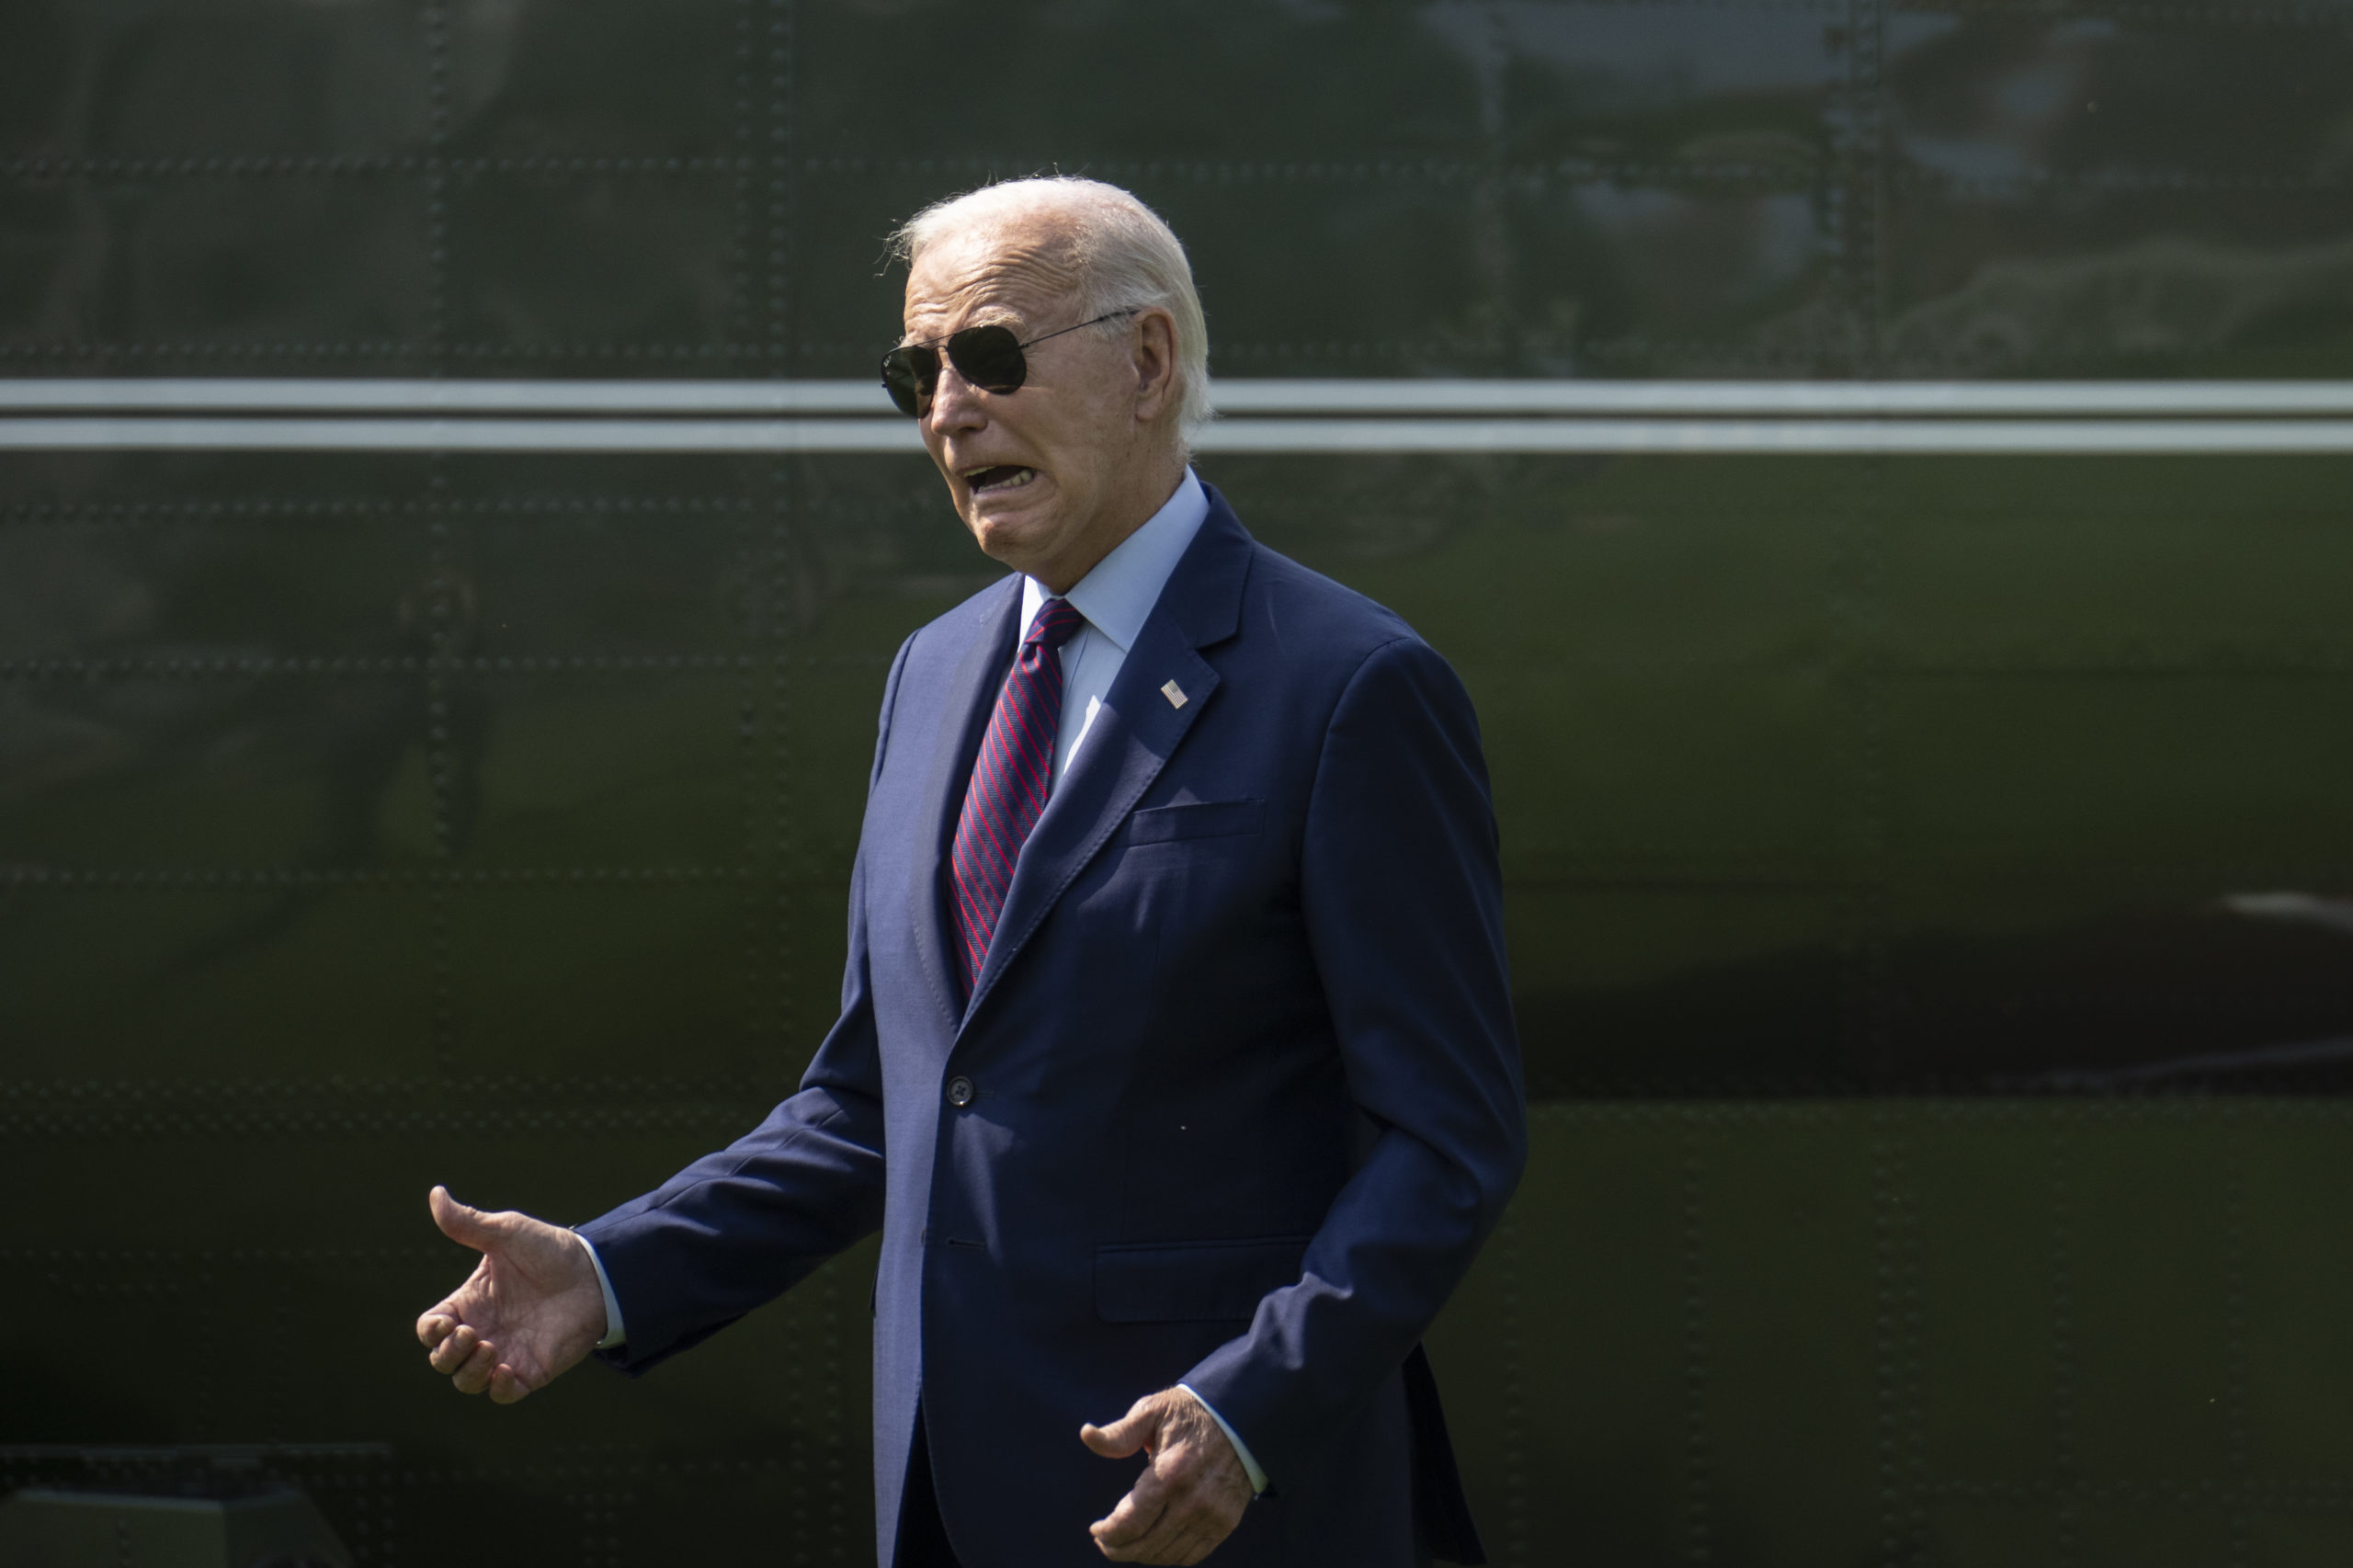 WASHINGTON, DC - JULY 28: U.S. President Joe Biden gestures toward visitors watching the departure as he walks to Marine One on the South Lawn of the White House July 28, 2023 in Washington, DC. President Biden is traveling to Auburn, Maine to discuss manufacturing and his "Bidenomics" economic plan. (Photo by Drew Angerer/Getty Images)